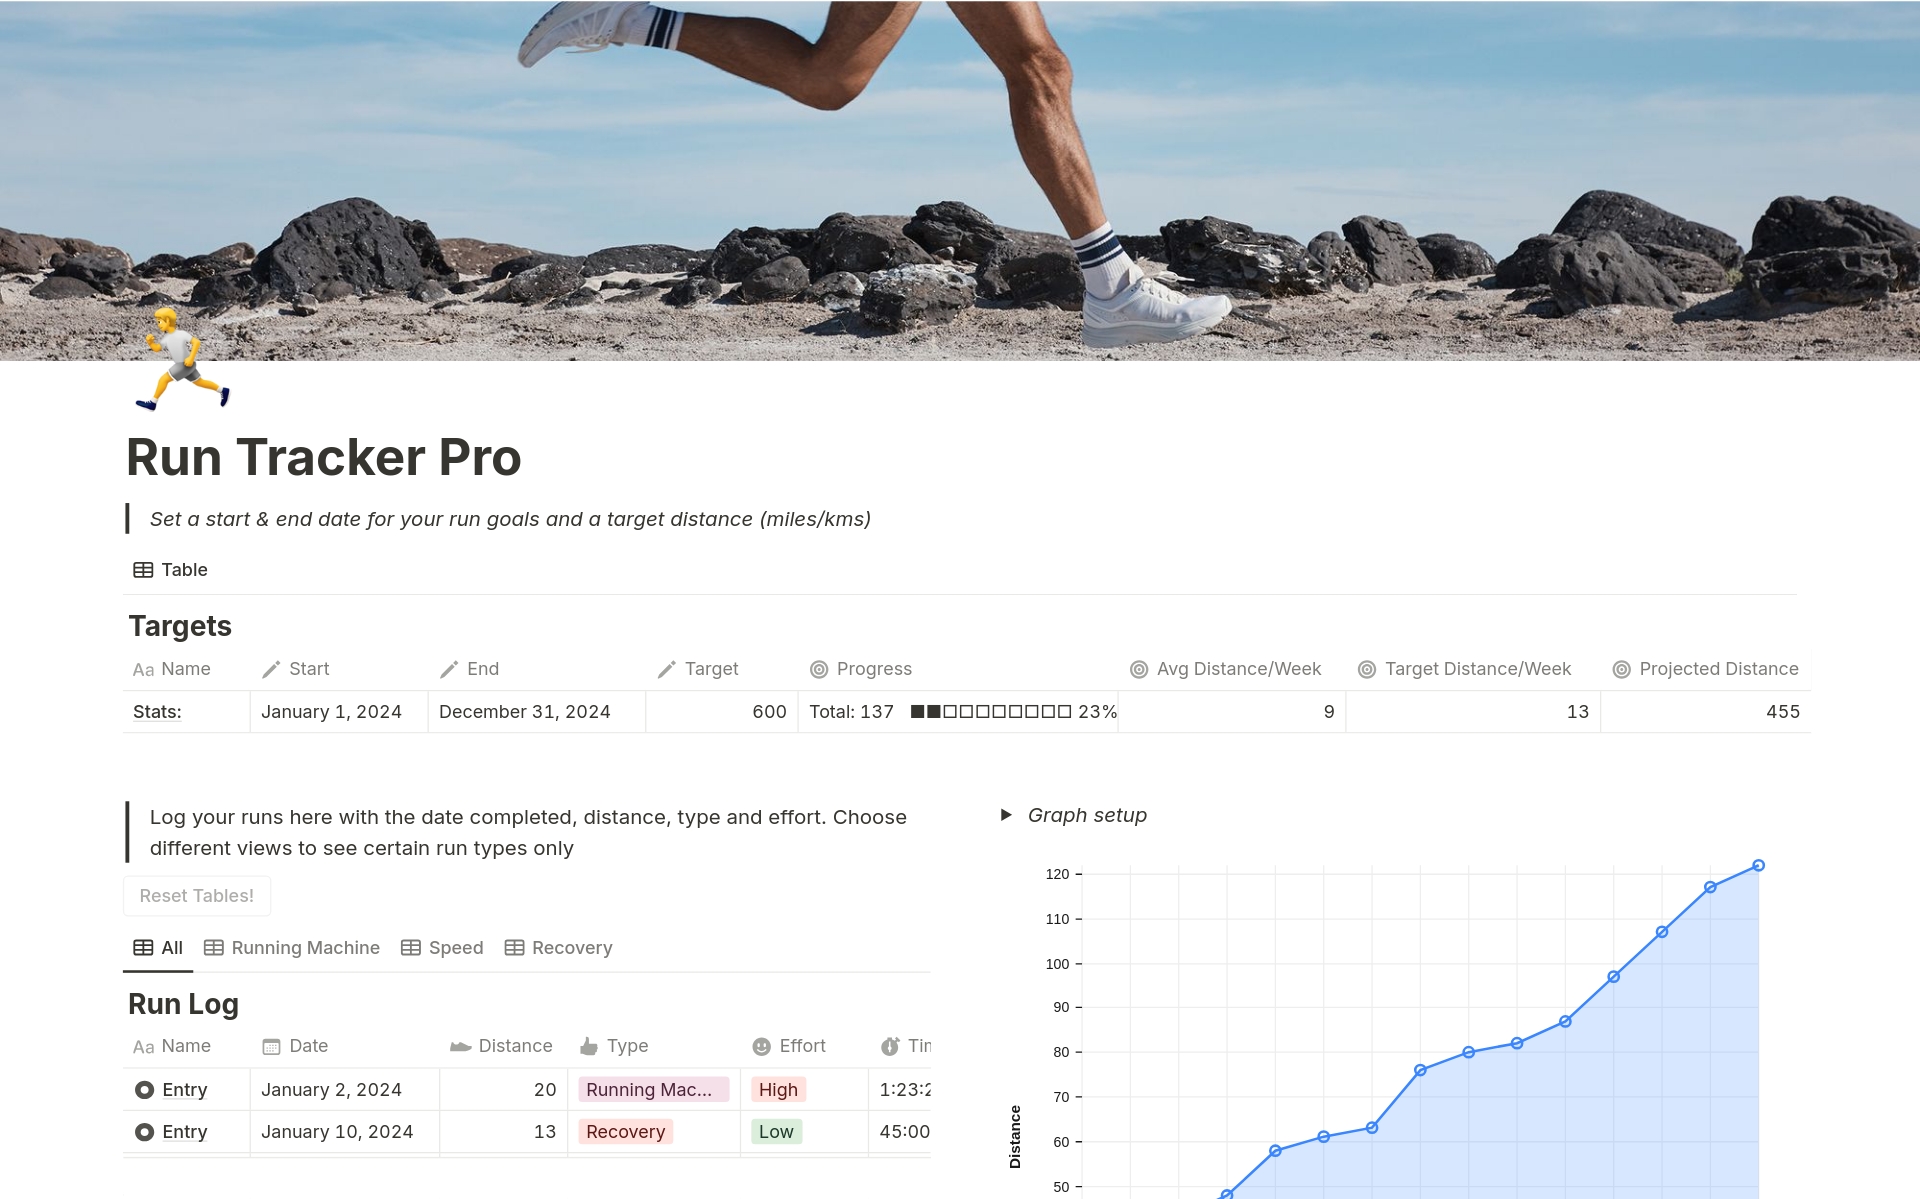 Track your runs like a pro and log your miles or km towards your distance goal. Set your targets, and see what weekly and monthly distance you need to cover. Built for any runner, from beginners to ultra runners.